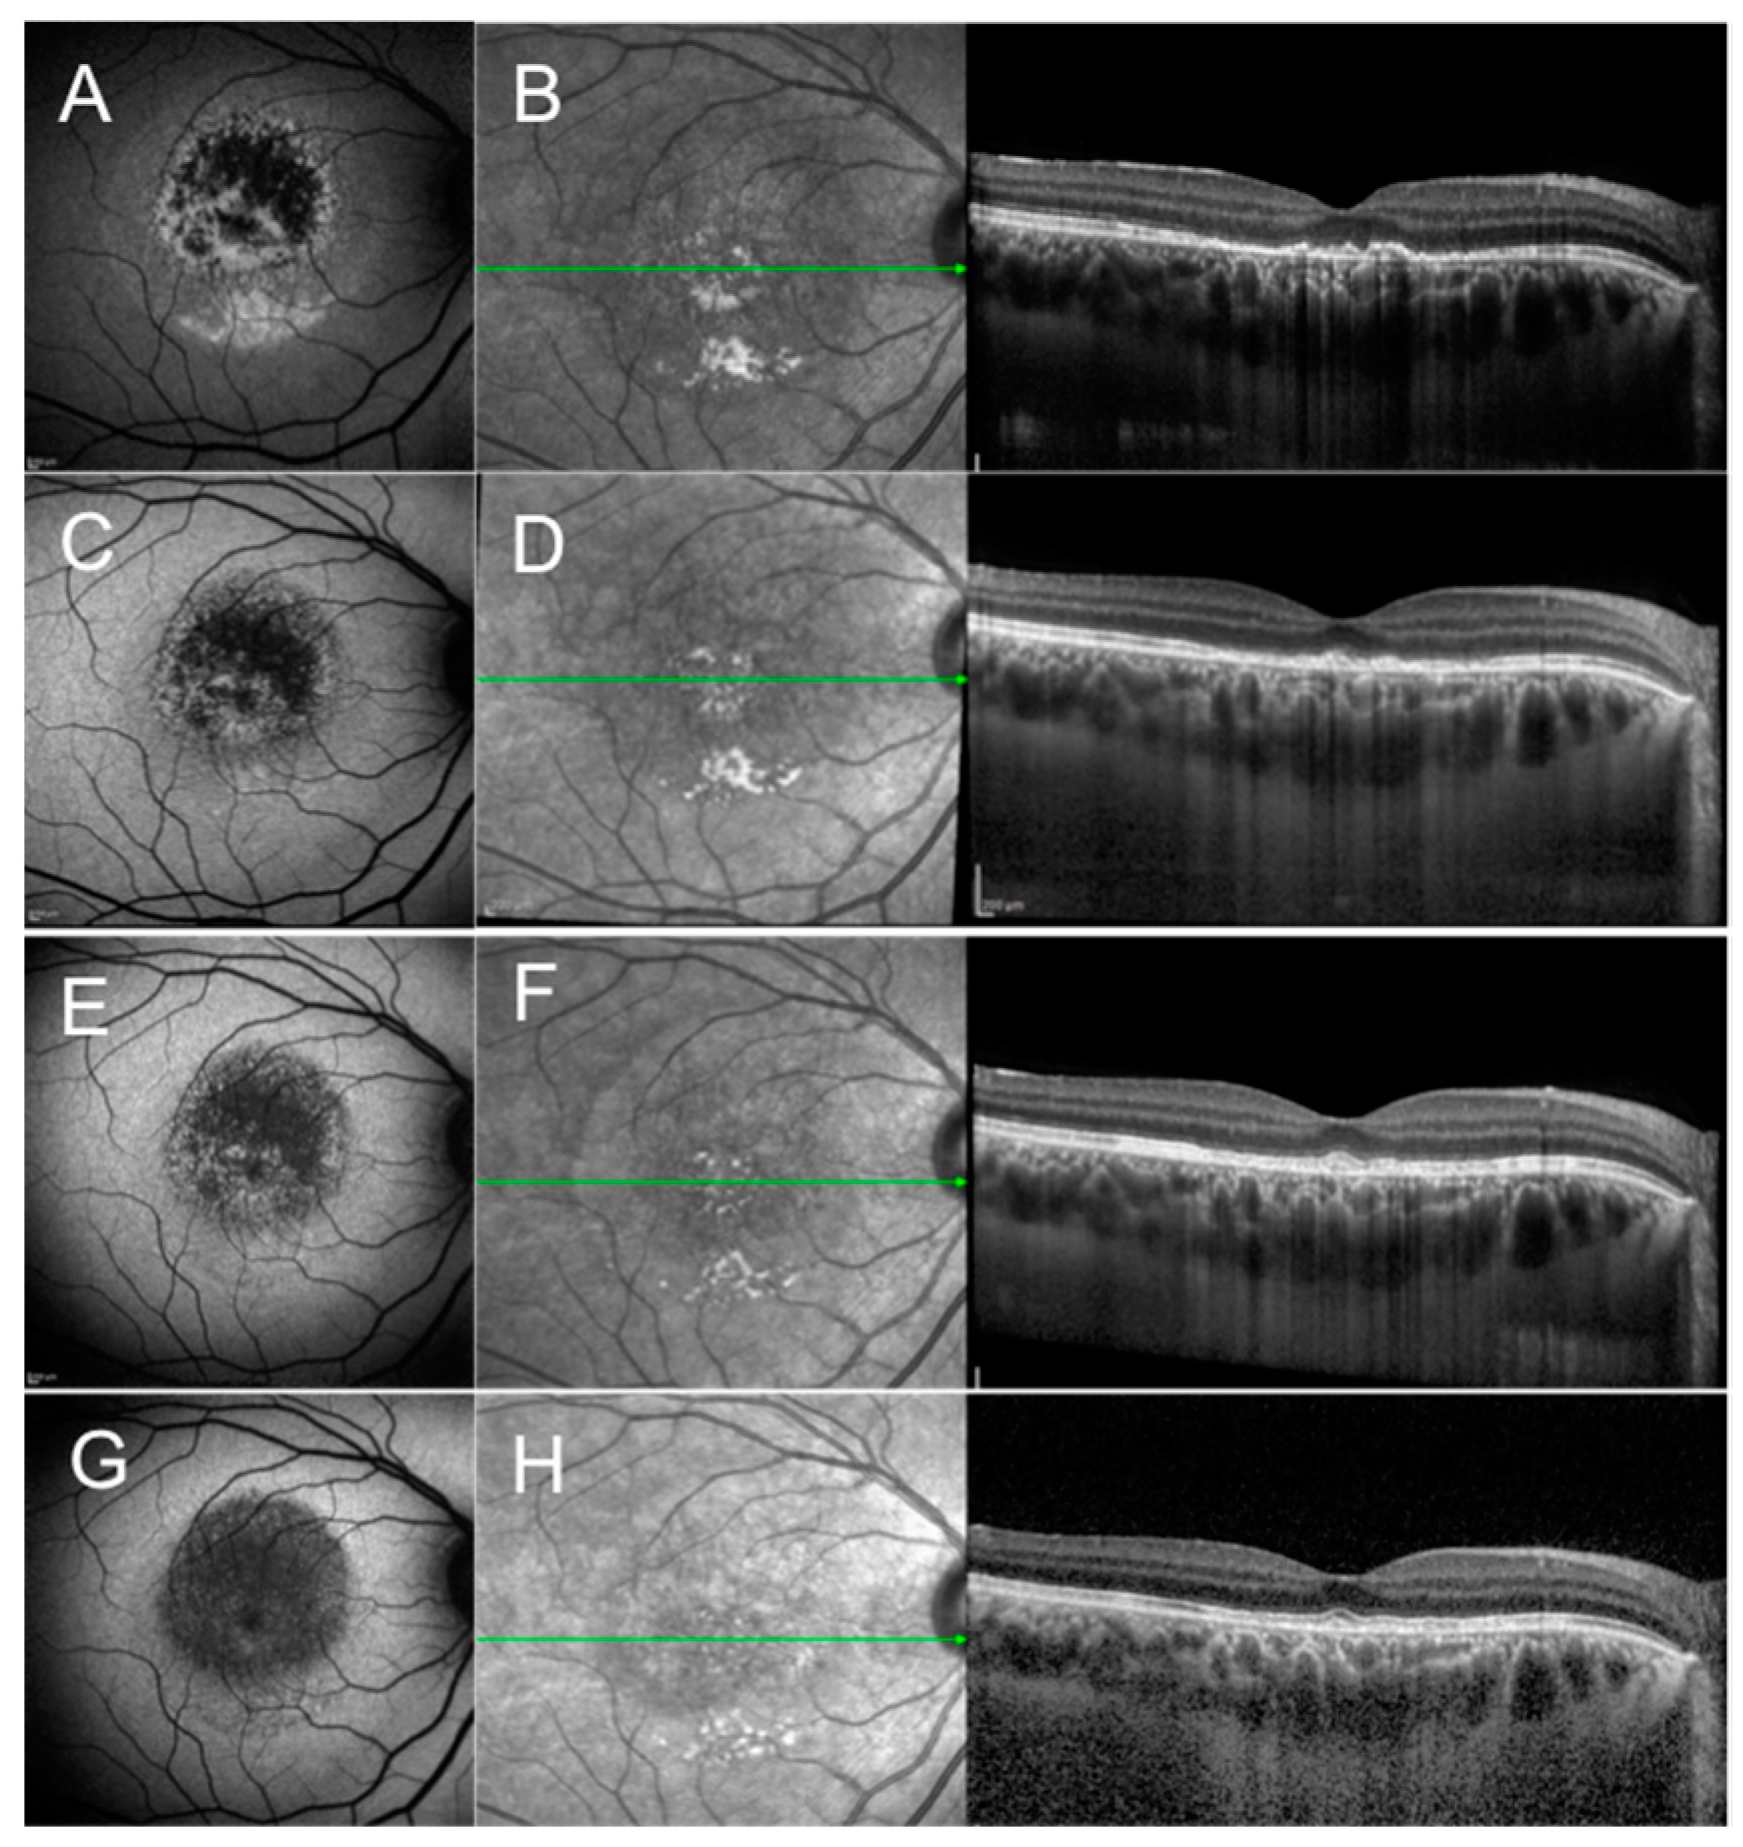 Infectious optic neuropathies: a clinical update | EB